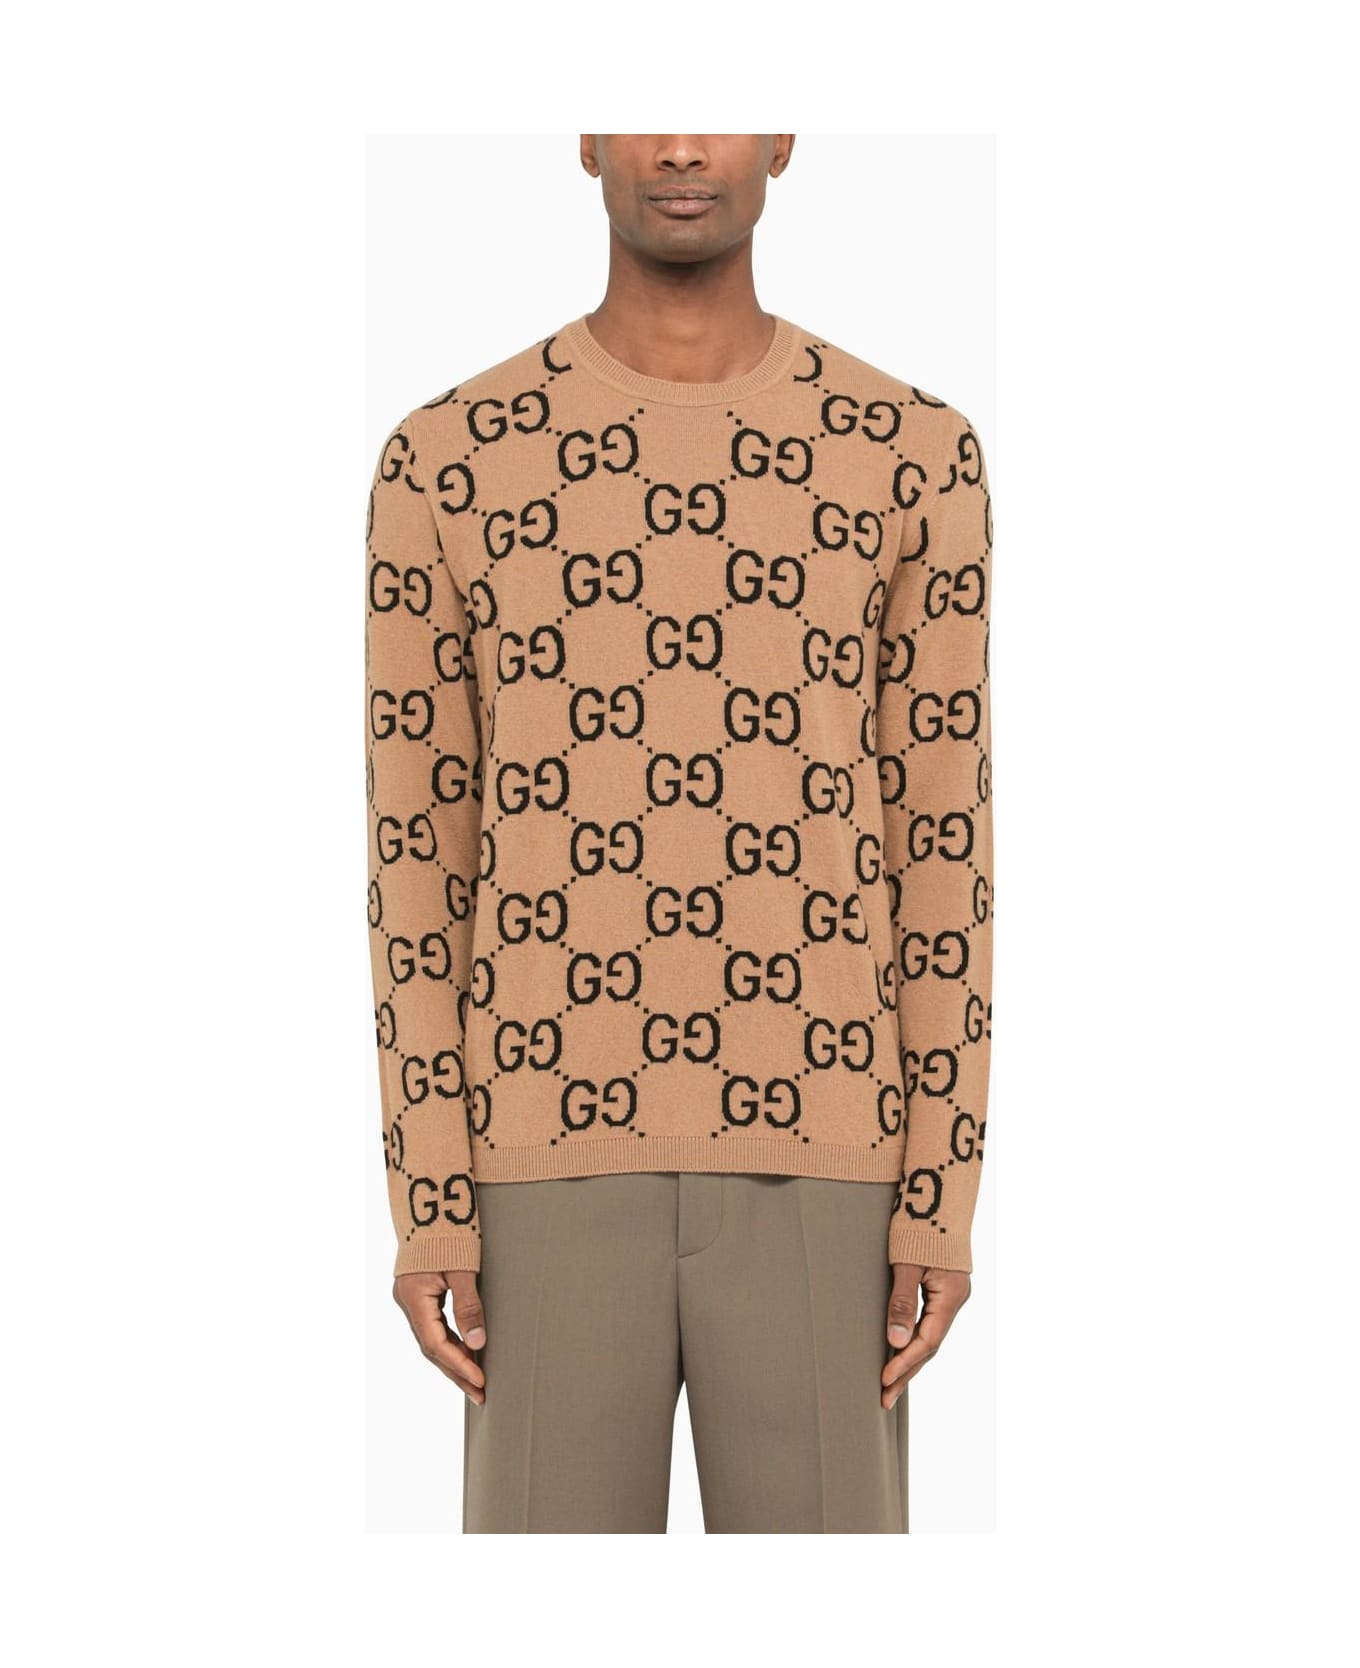 Gucci Sweater In Wool Gg Camel - Camel